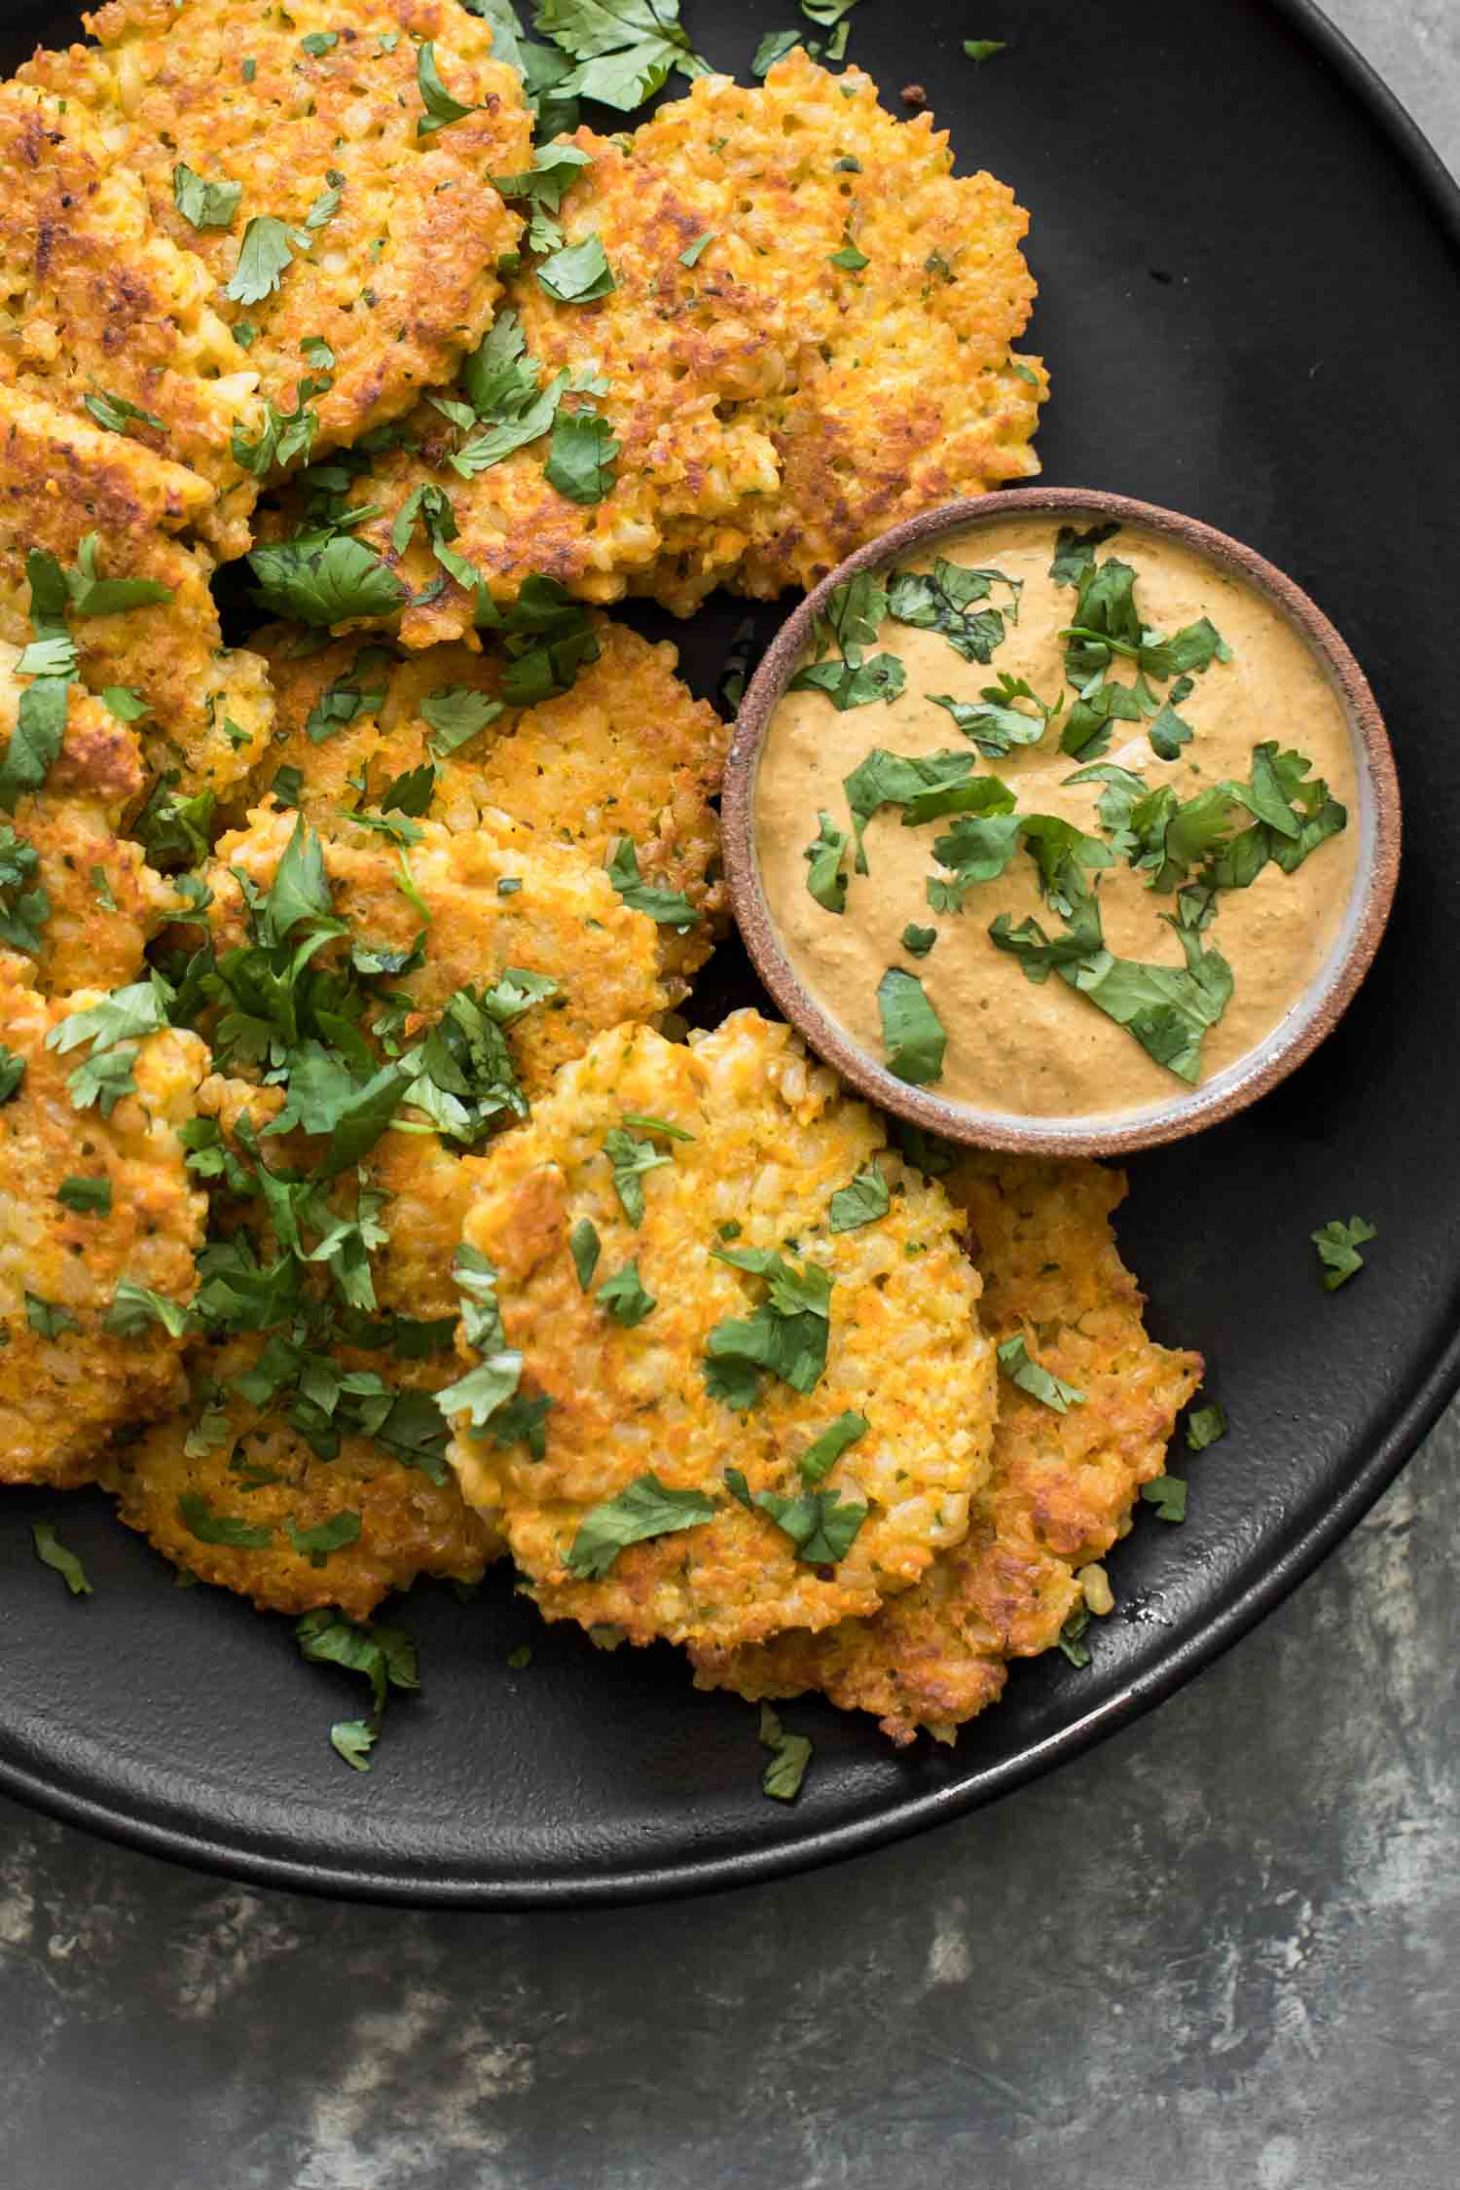 Brown Rice Carrot Fritters with Chipotle Sunflower Sauce | Naturally Ella